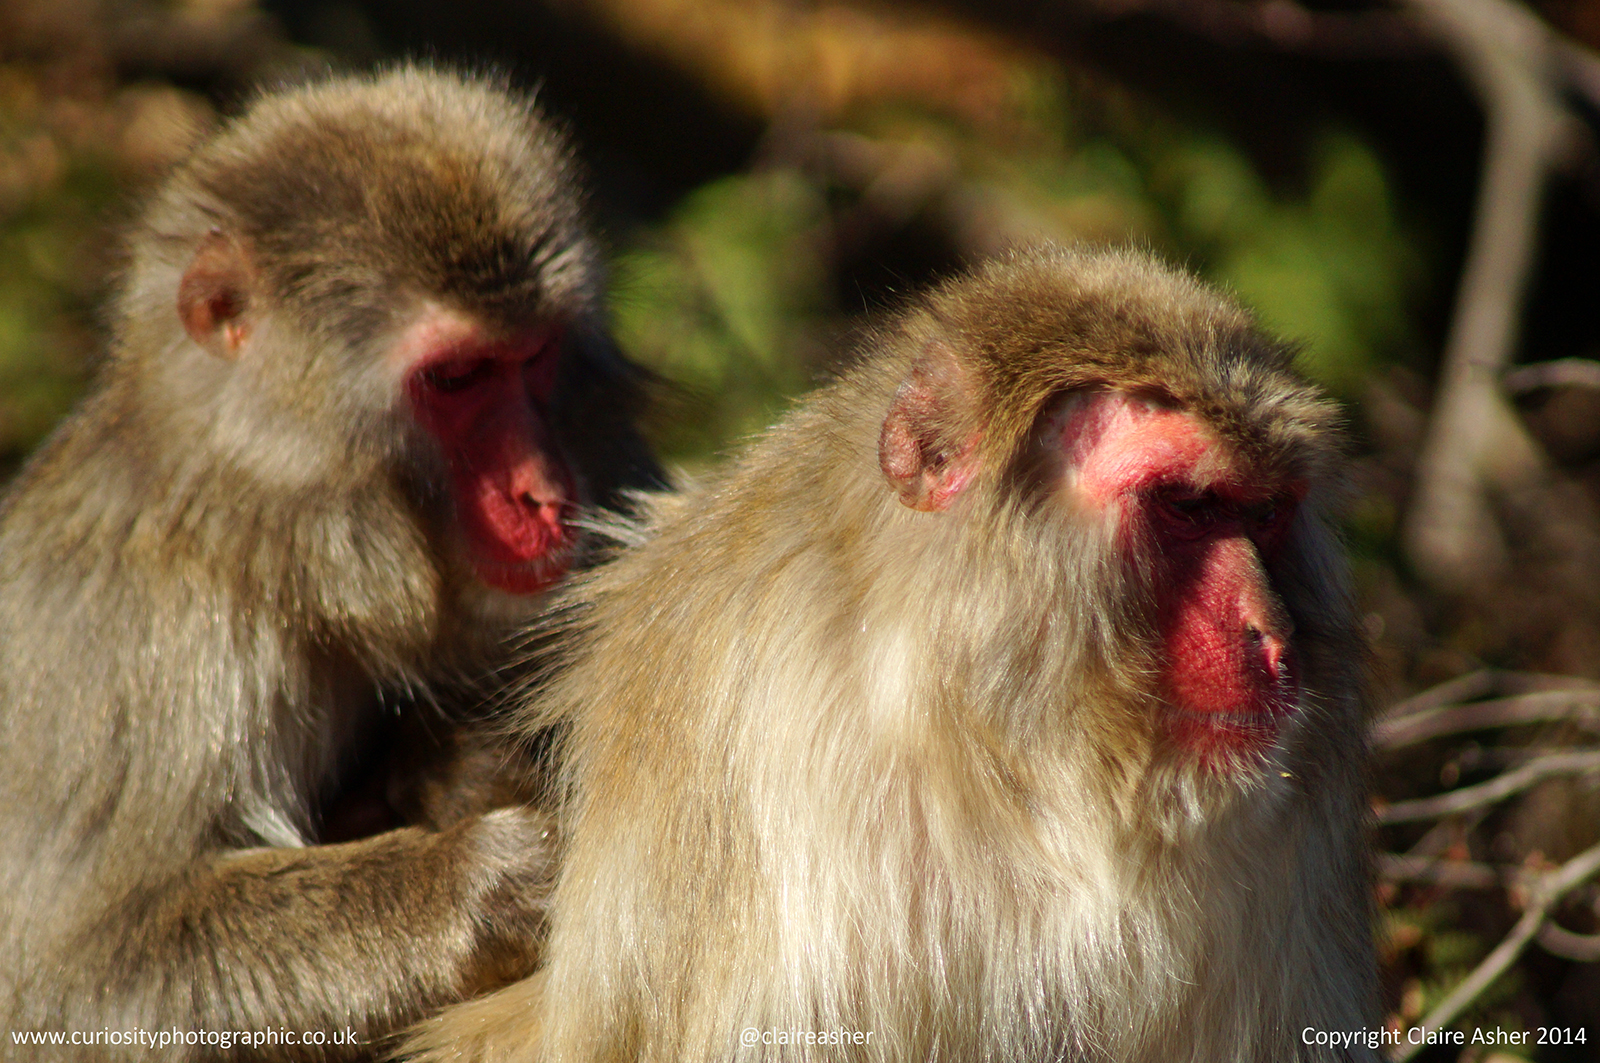 One Japanese macaque (Macaca fuscata) grooming another, photographed in Kyoto, Japan in 2013.